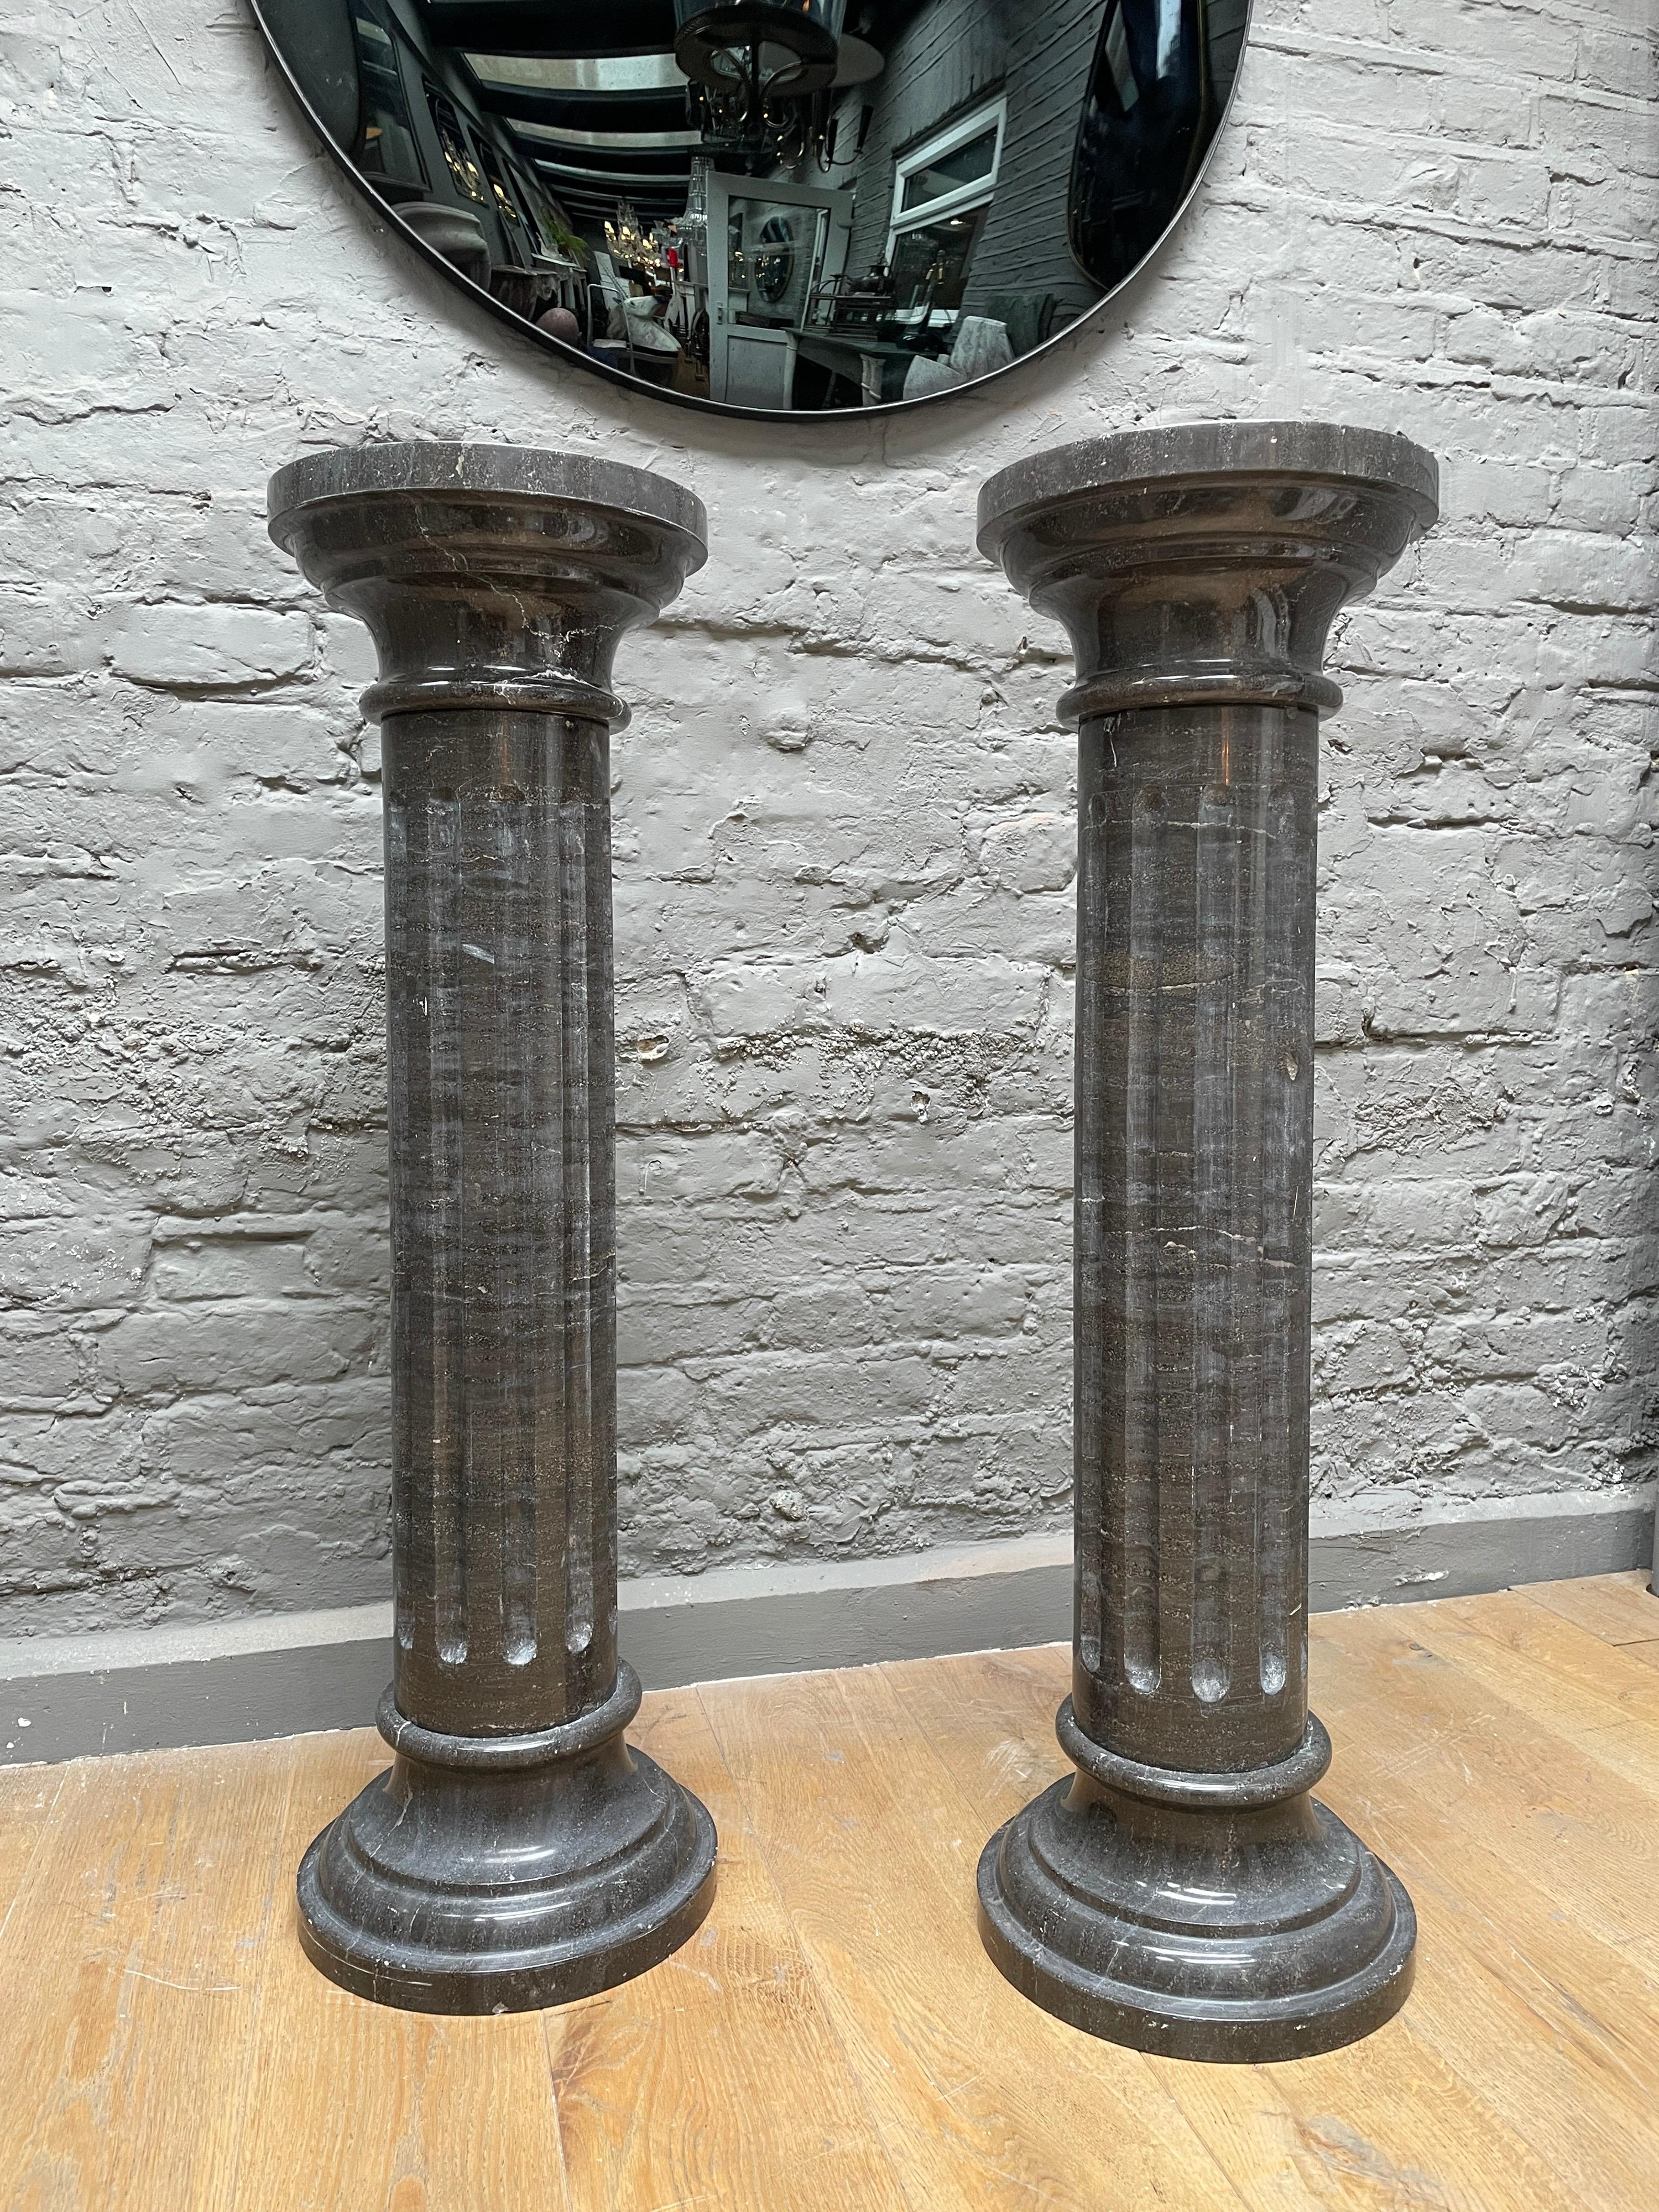 A quality pair of columns in fossil marble. The circular socle bases with fluted columns and conforming circular capitals. Each piece breaking down to socle, column and capital. Well made and in quality fossil marble,

Late 20th century.